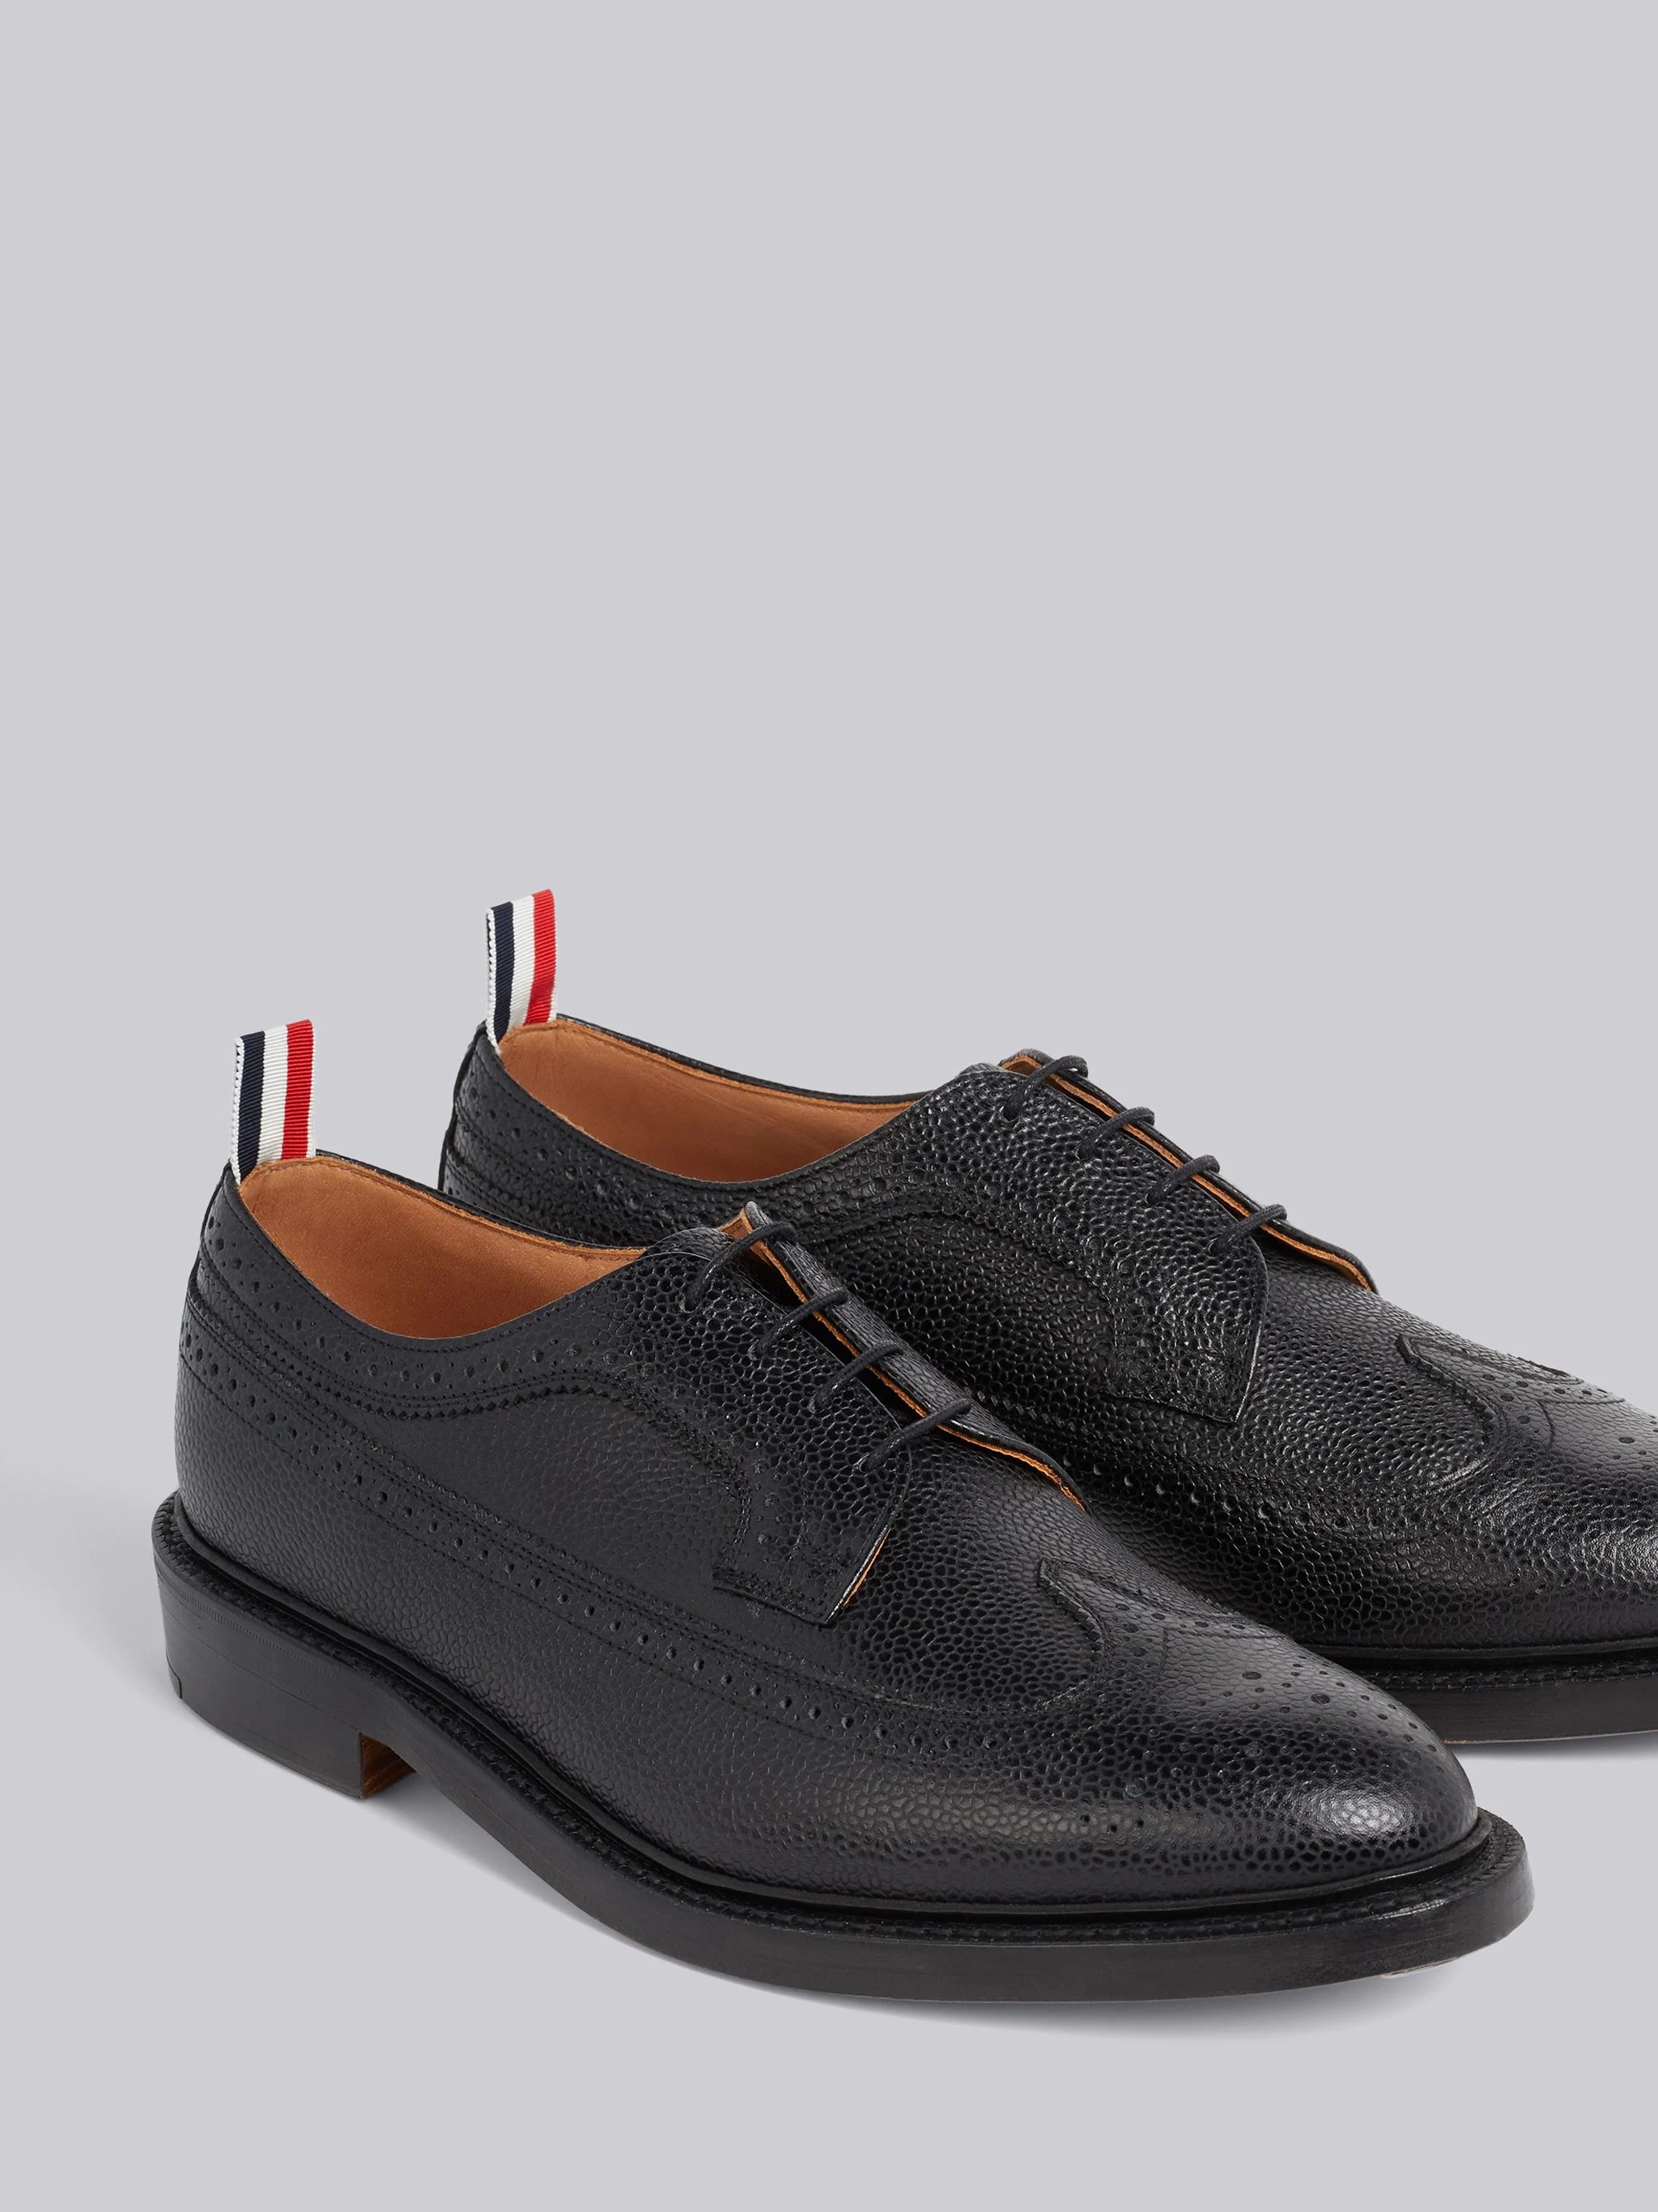 Black Pebble Grain Classic Longwing Brogue With Leather Sole - 2